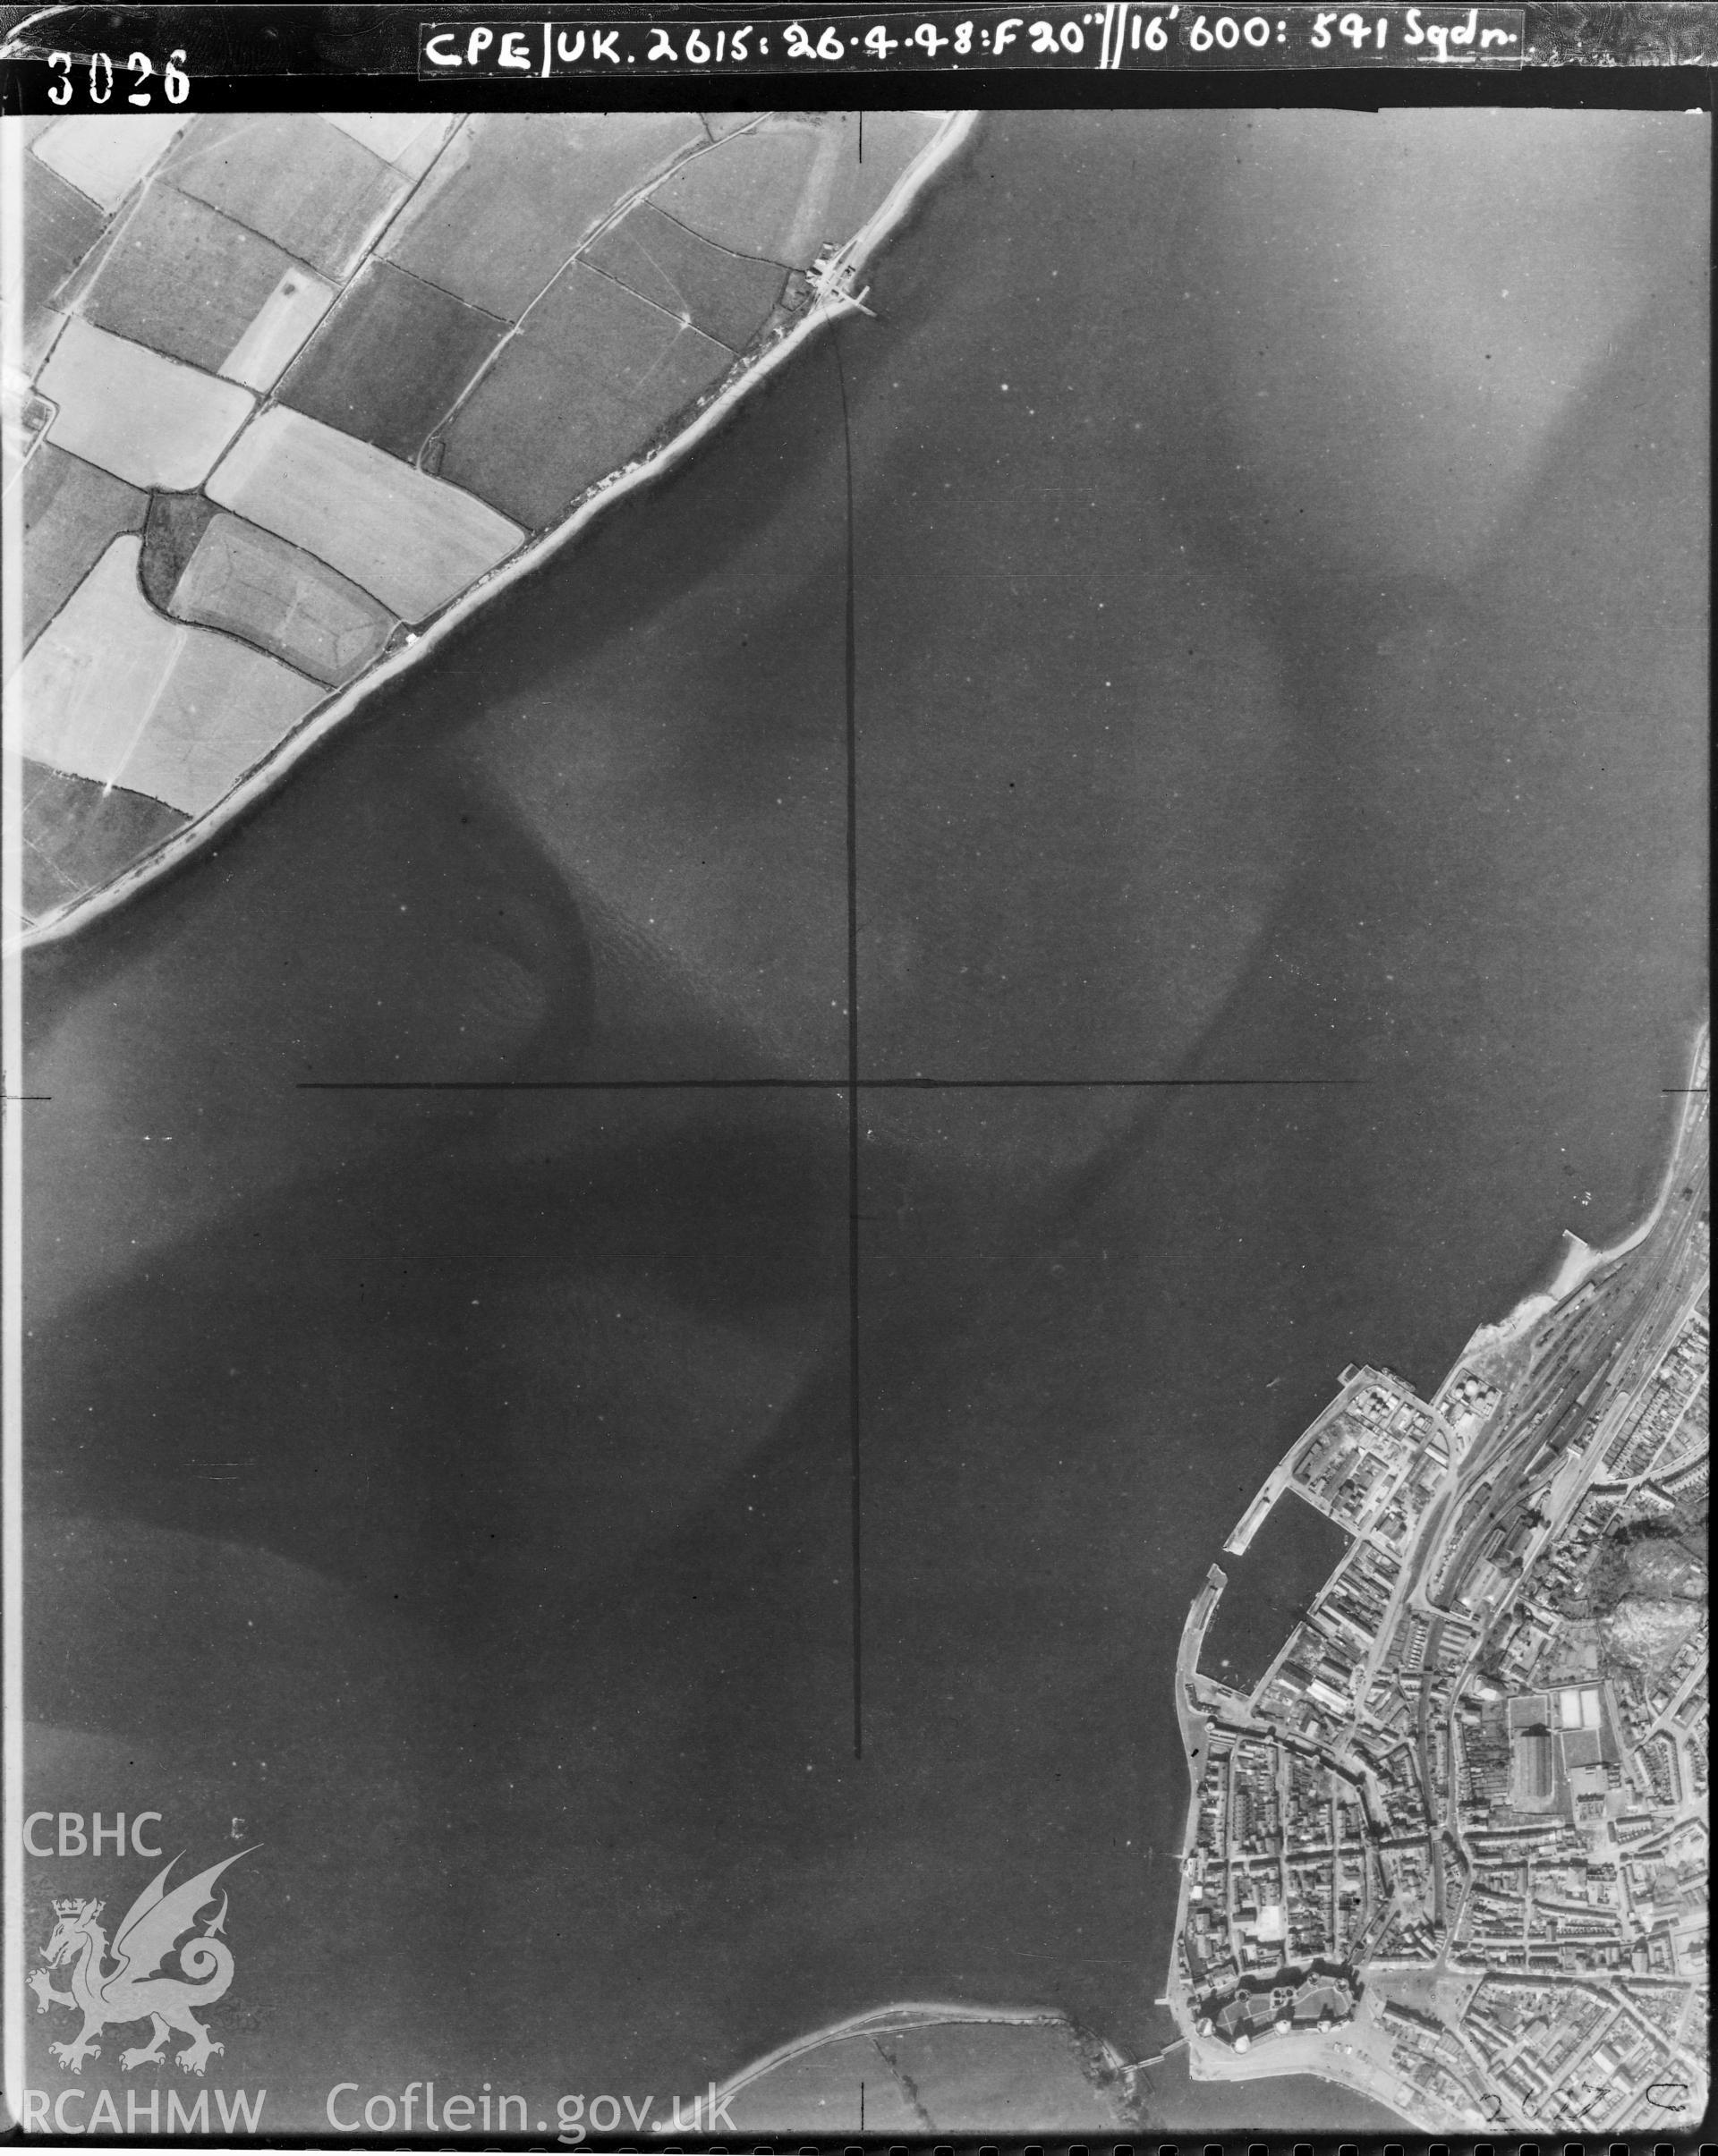 Black and white vertical aerial photograph taken by the RAF on 26/04/1948, picturing Caernarfon, at a scale of 1:10000. The photograph includes part of Rhosyr community on the Isle of Anglesey.